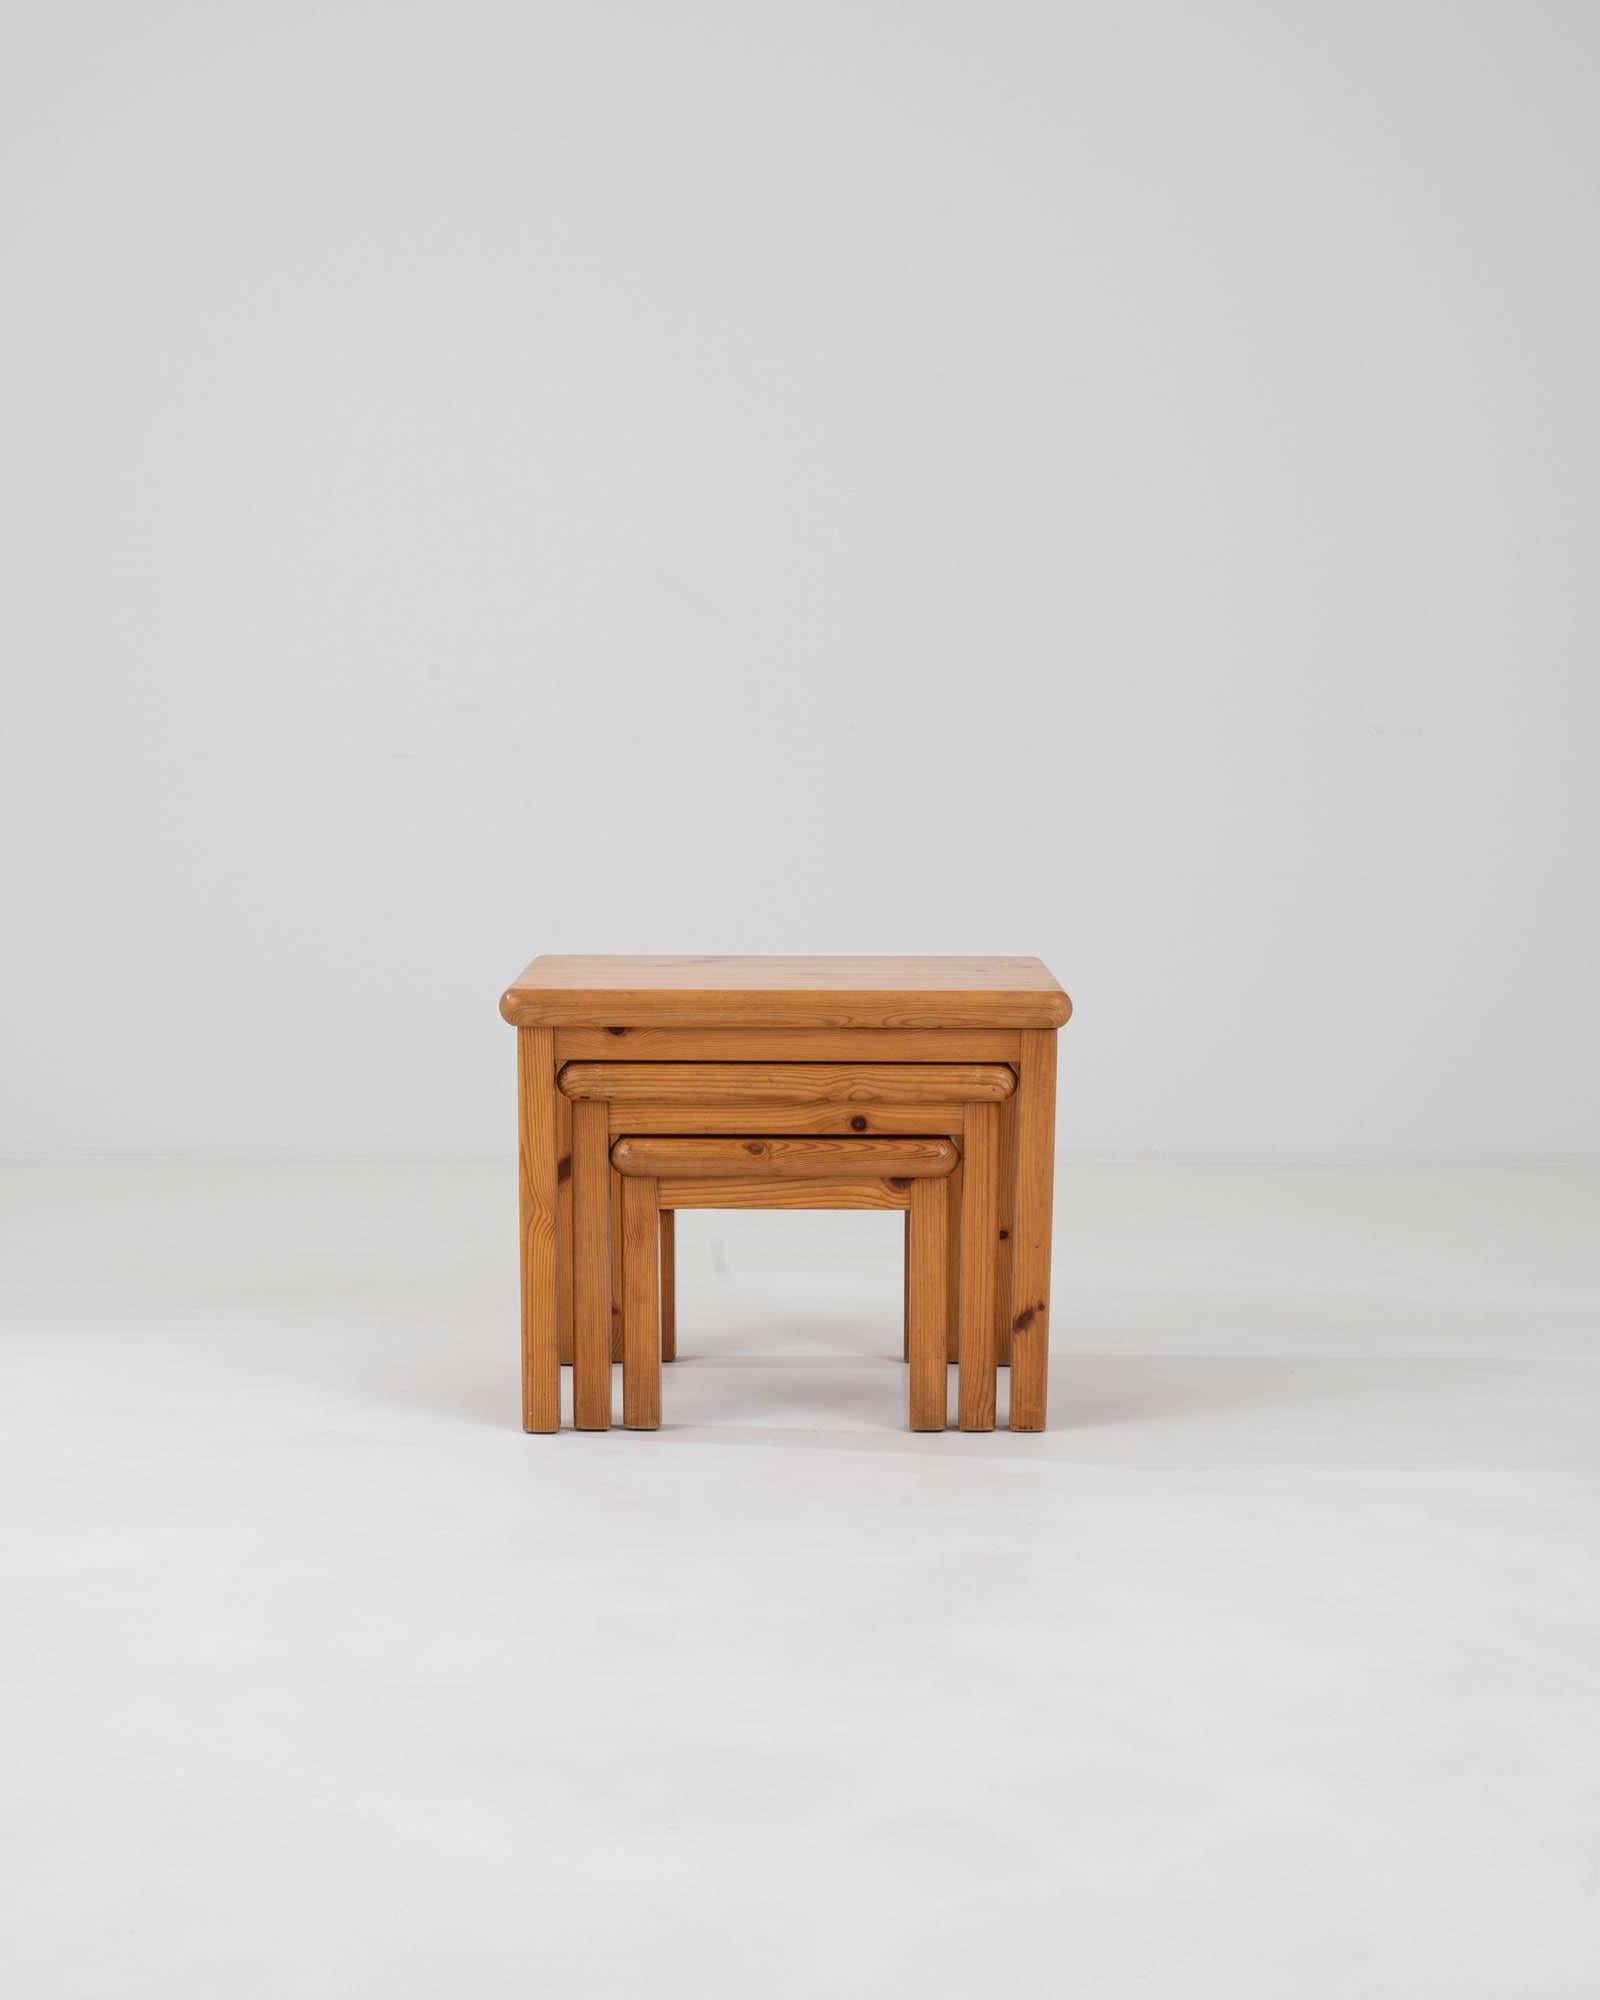 Discover the epitome of Scandinavian design with this set of three 20th Century Danish Wooden Nesting Tables. Each table is a testament to the timeless appeal of Danish minimalism, featuring clean lines and a warm, honey-toned wood finish that